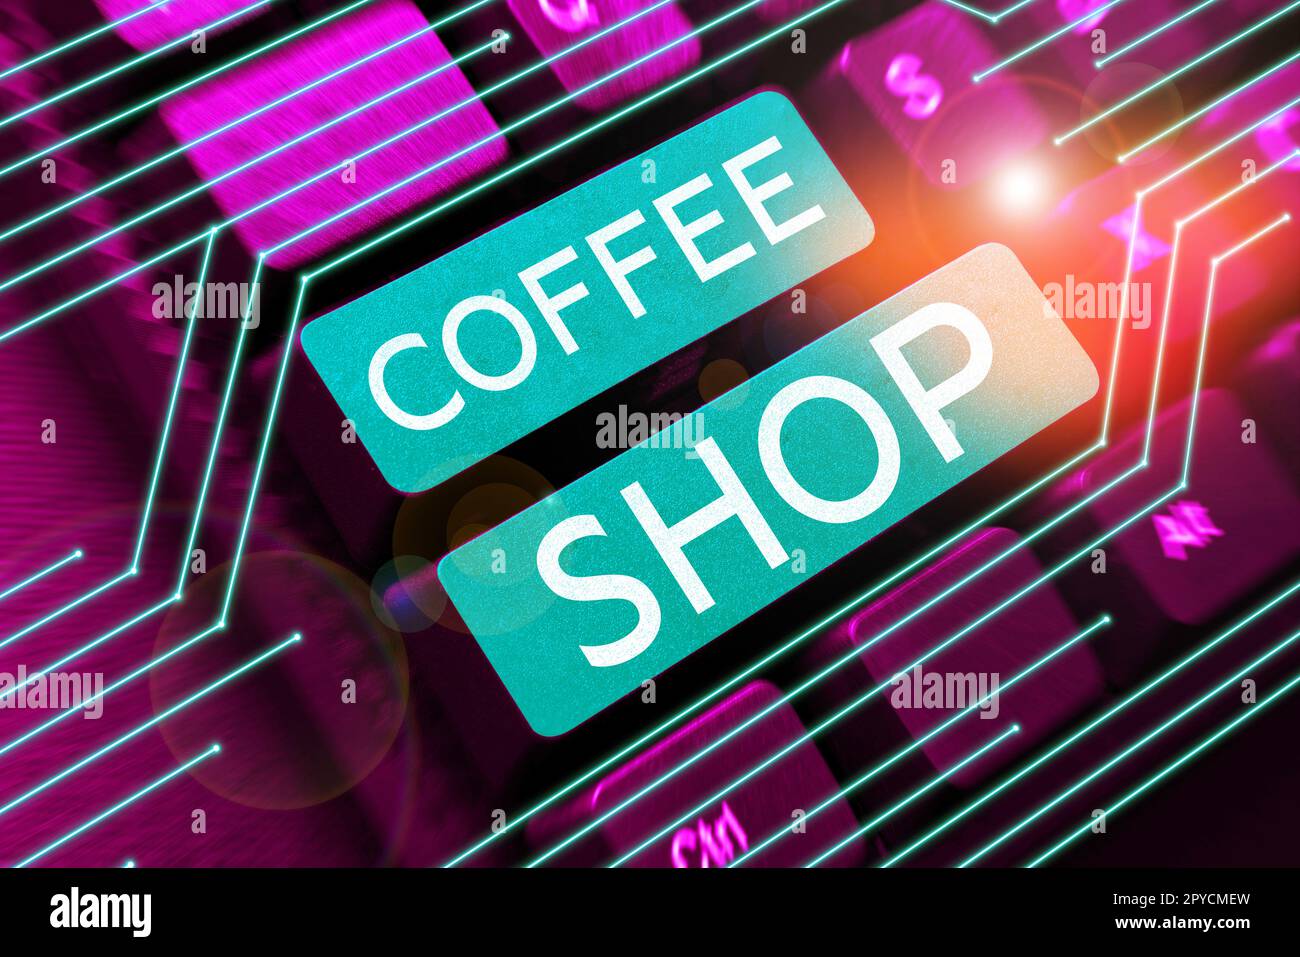 Writing displaying text Coffee Shop. Concept meaning small informal restaurant serving coffee and light refreshments Stock Photo